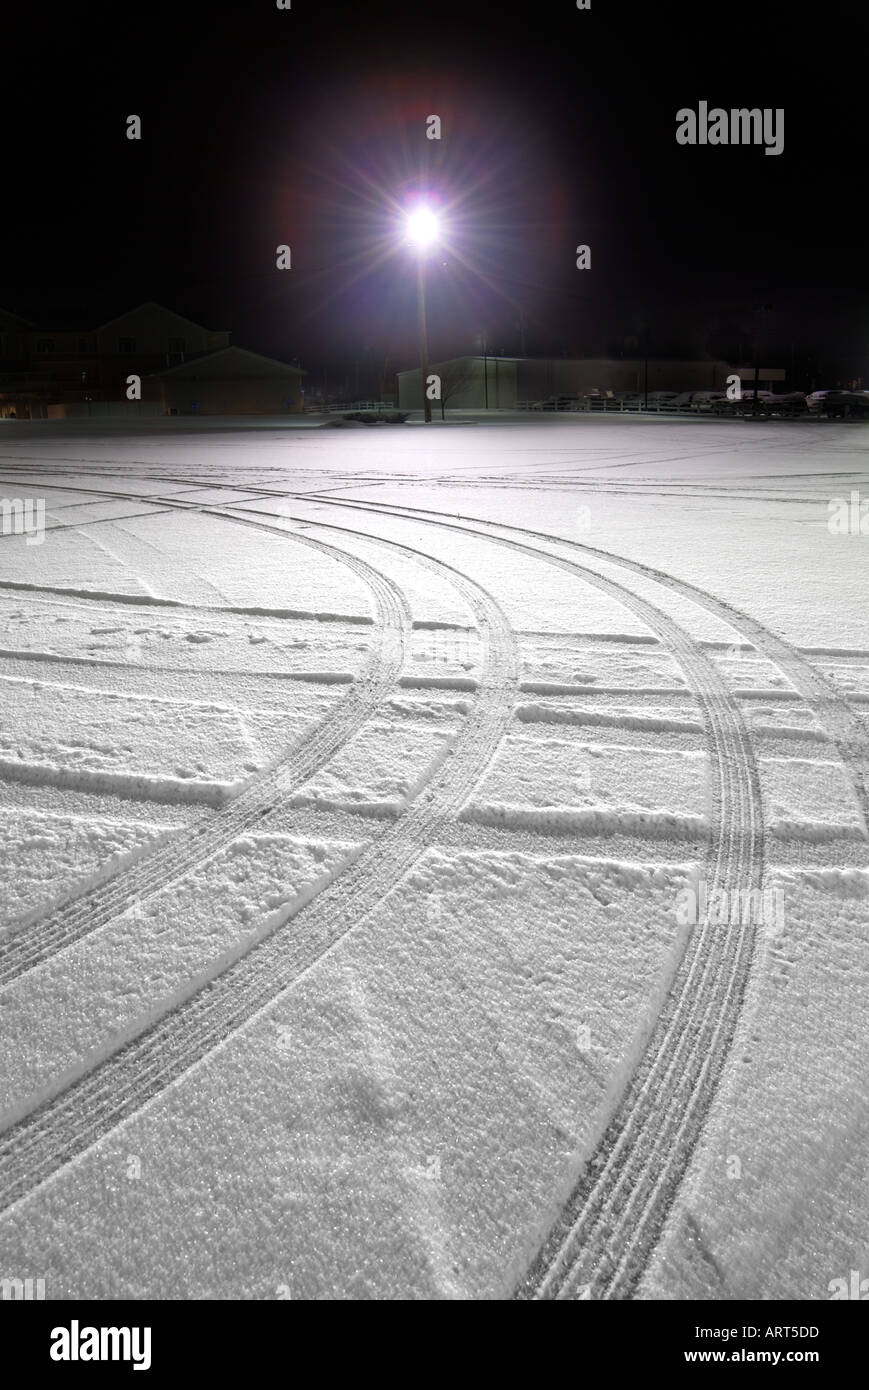 Tire Tracks In Snow At Night, Lone Light In Parking Lot Stock Photo